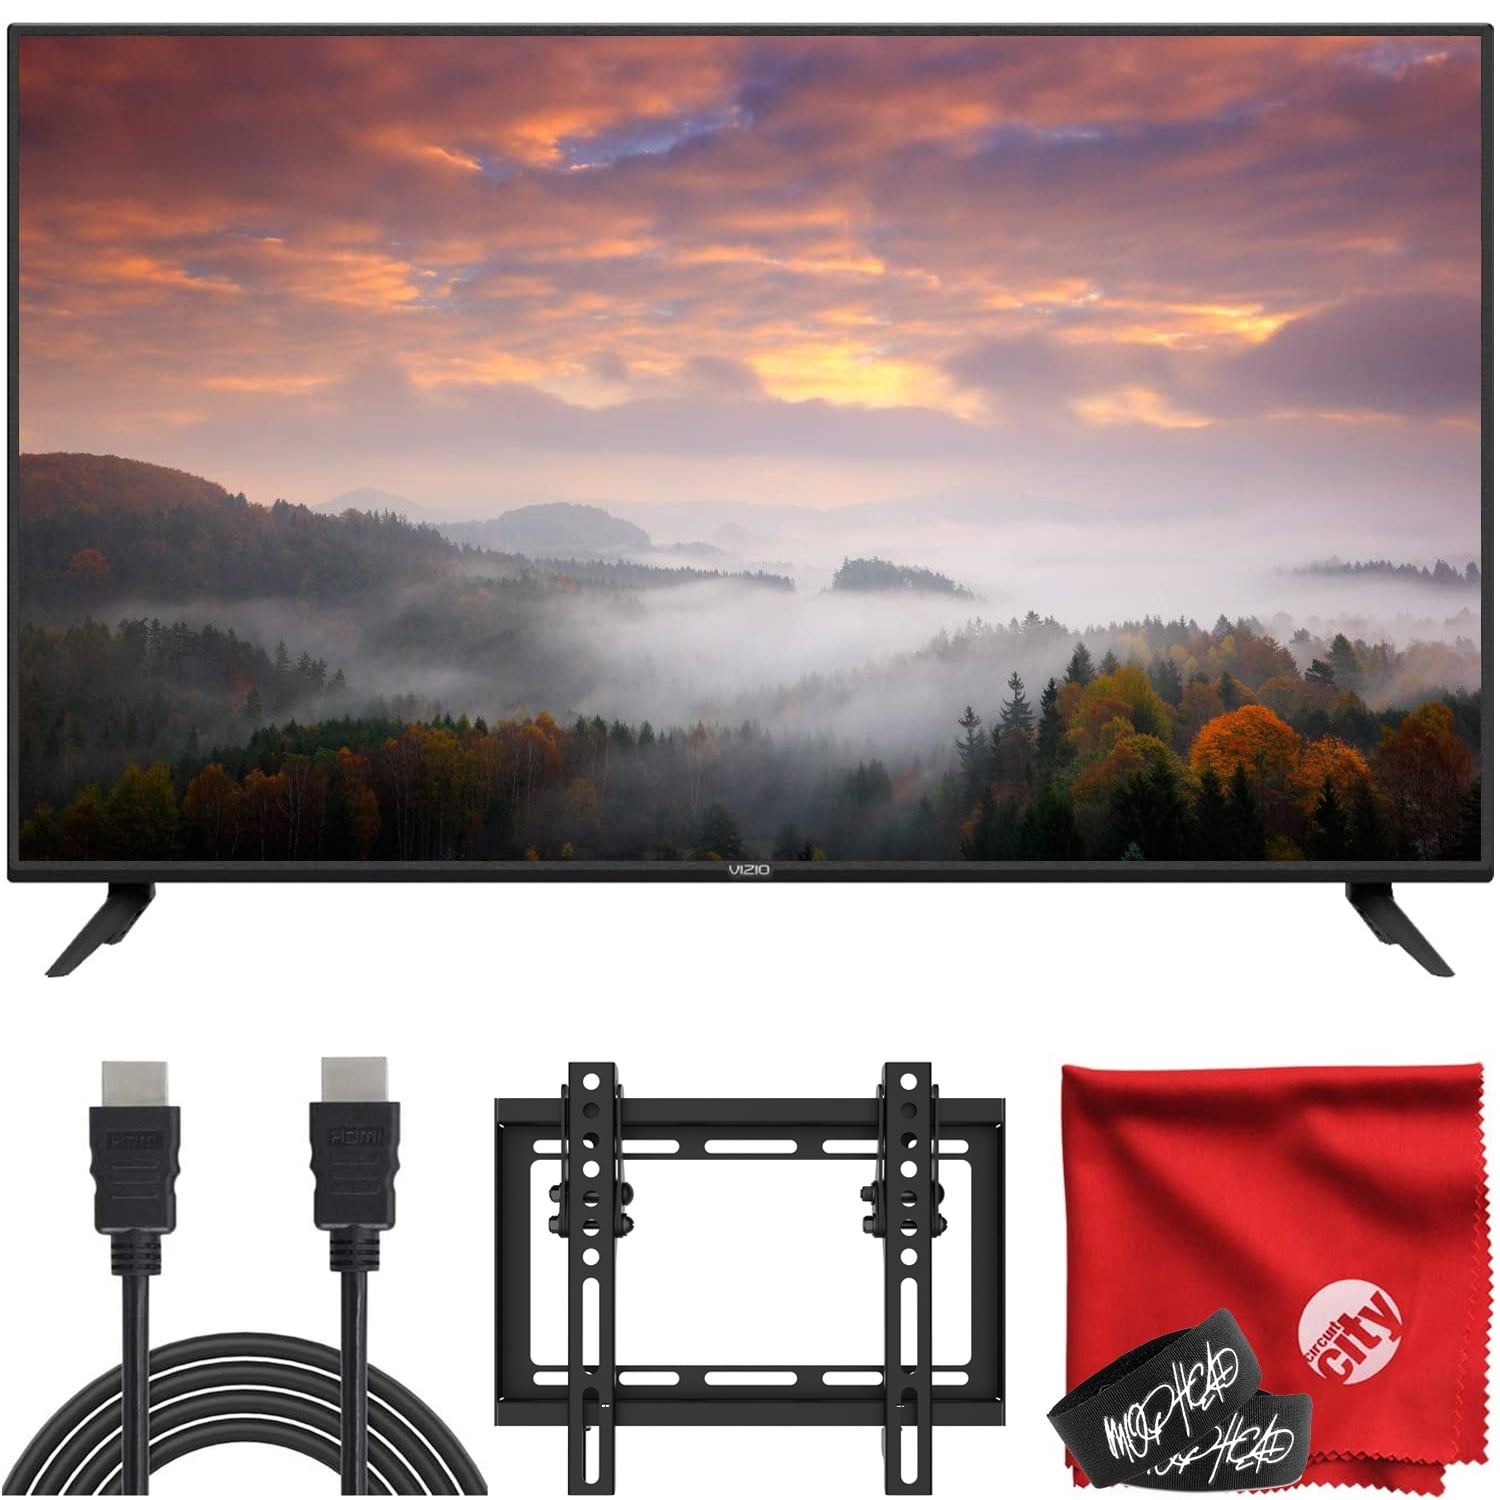 VIZIO V-Series 43-Inch 2160p 4K LED HDR Smart TV (V435-H11) HDMI, USB, Dolby Vision HDR, Voice Control Bundle with Circuit City 6-Foot HDMI Cable, Wall Mount, Microfiber Cloth and 2x Cable Ties